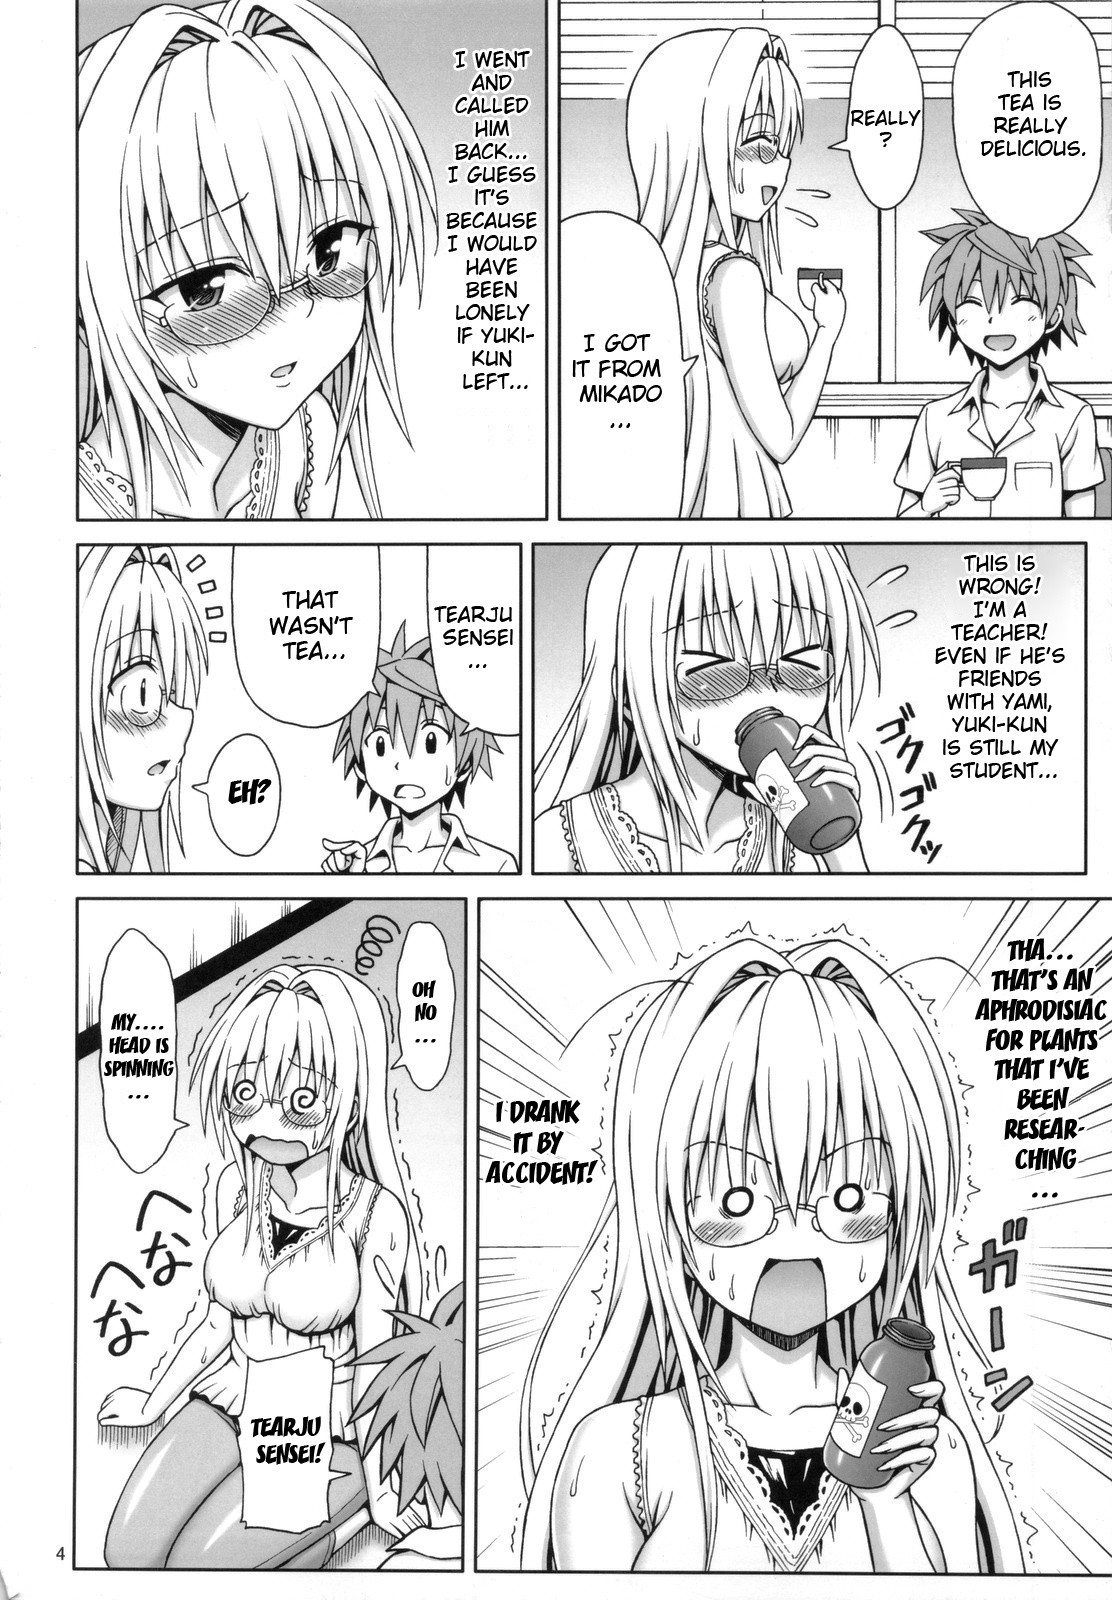 After-School Trouble hentai manga picture 3